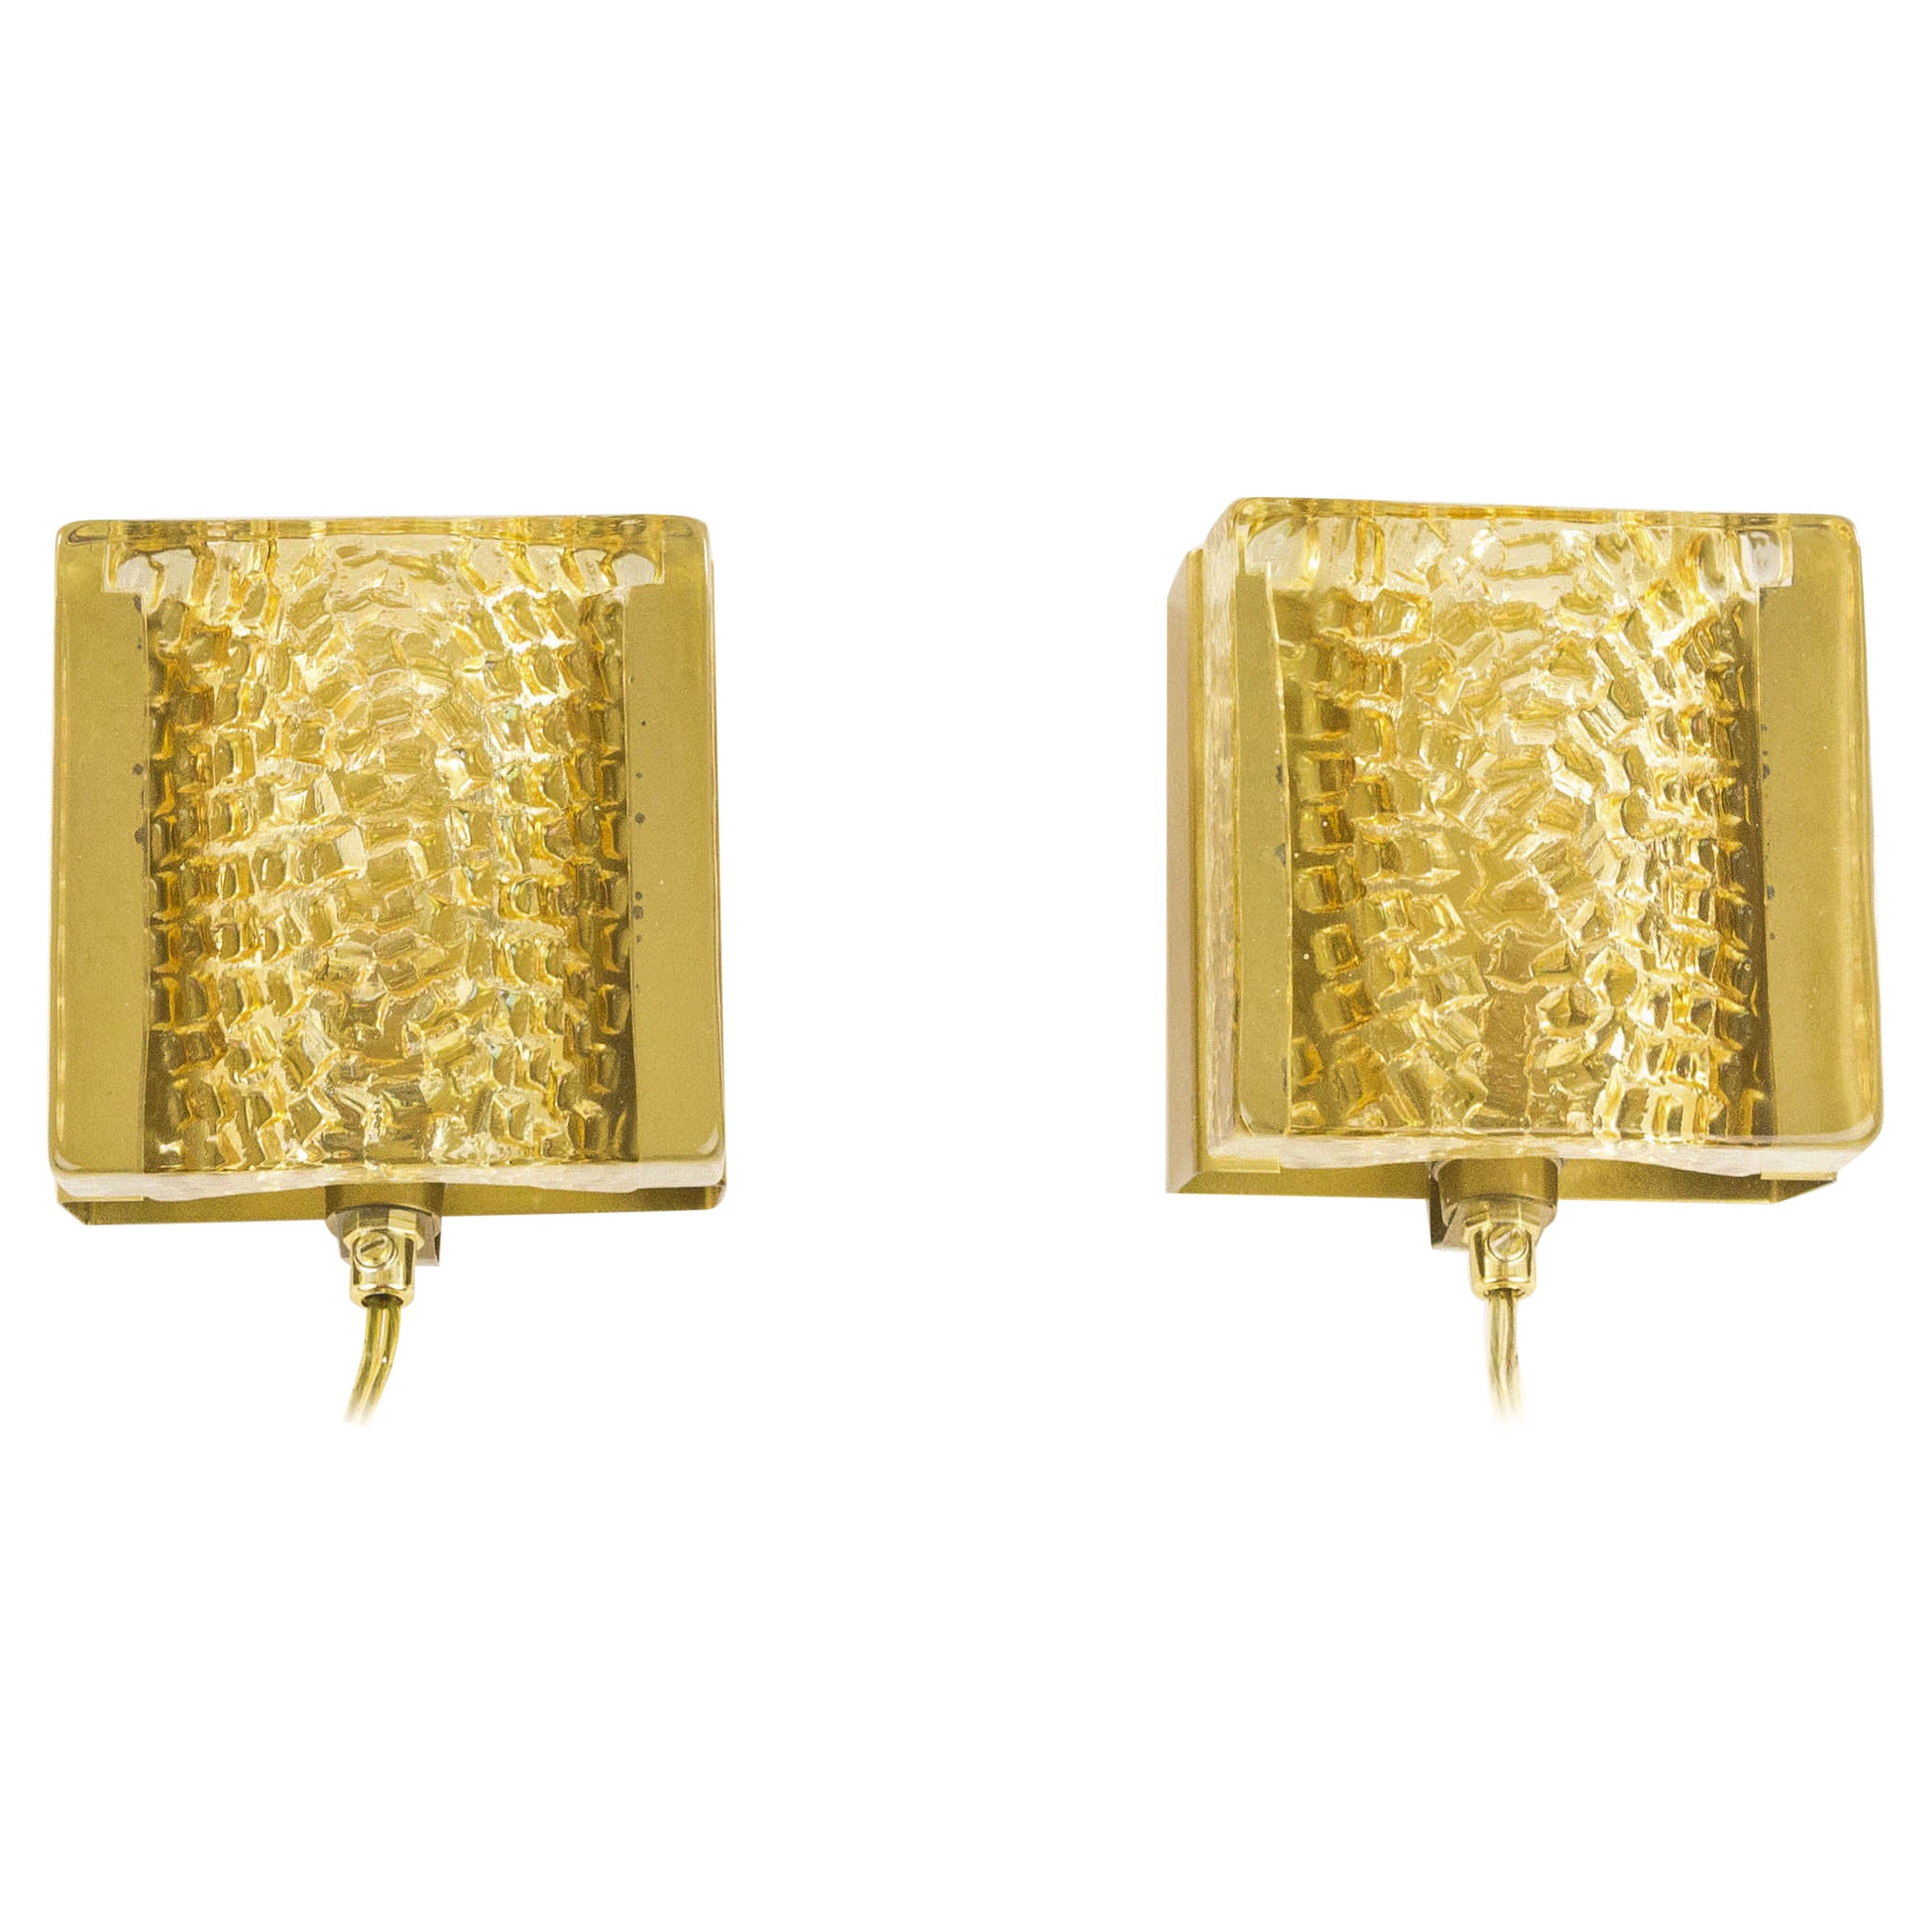 Pair of Kalmar glass and brass Wall lamps in gold by Vitrika, 1970s For Sale